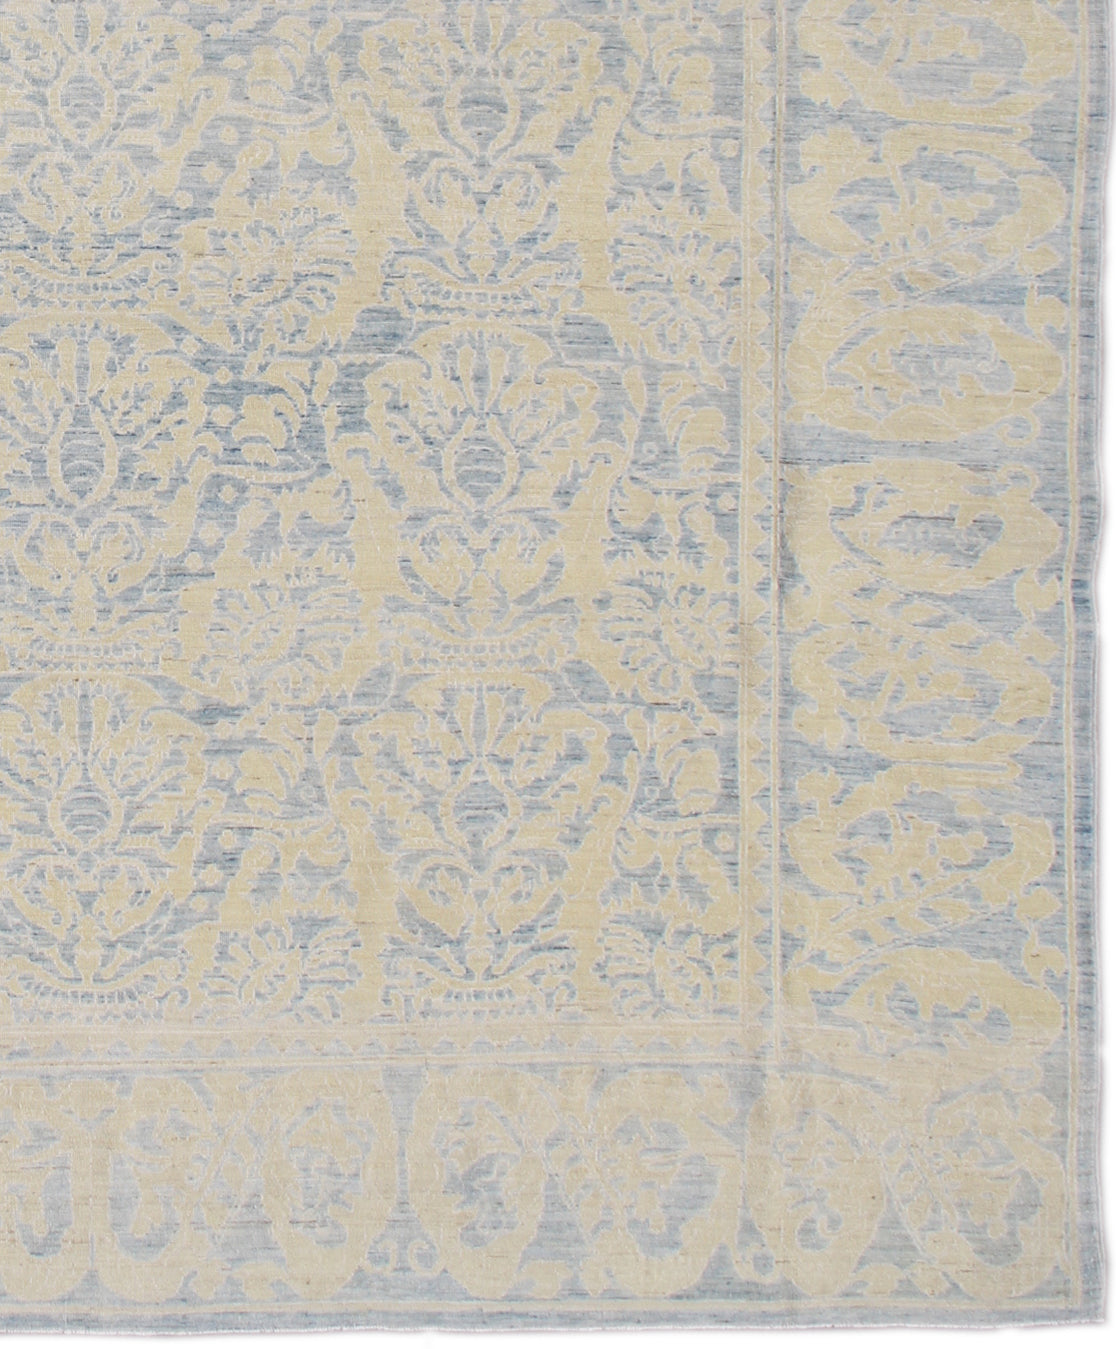 9.06 x  7.09 Blue and Soft Gold Spanish Design Hand-Knotted Ariana Transitional Area Rug